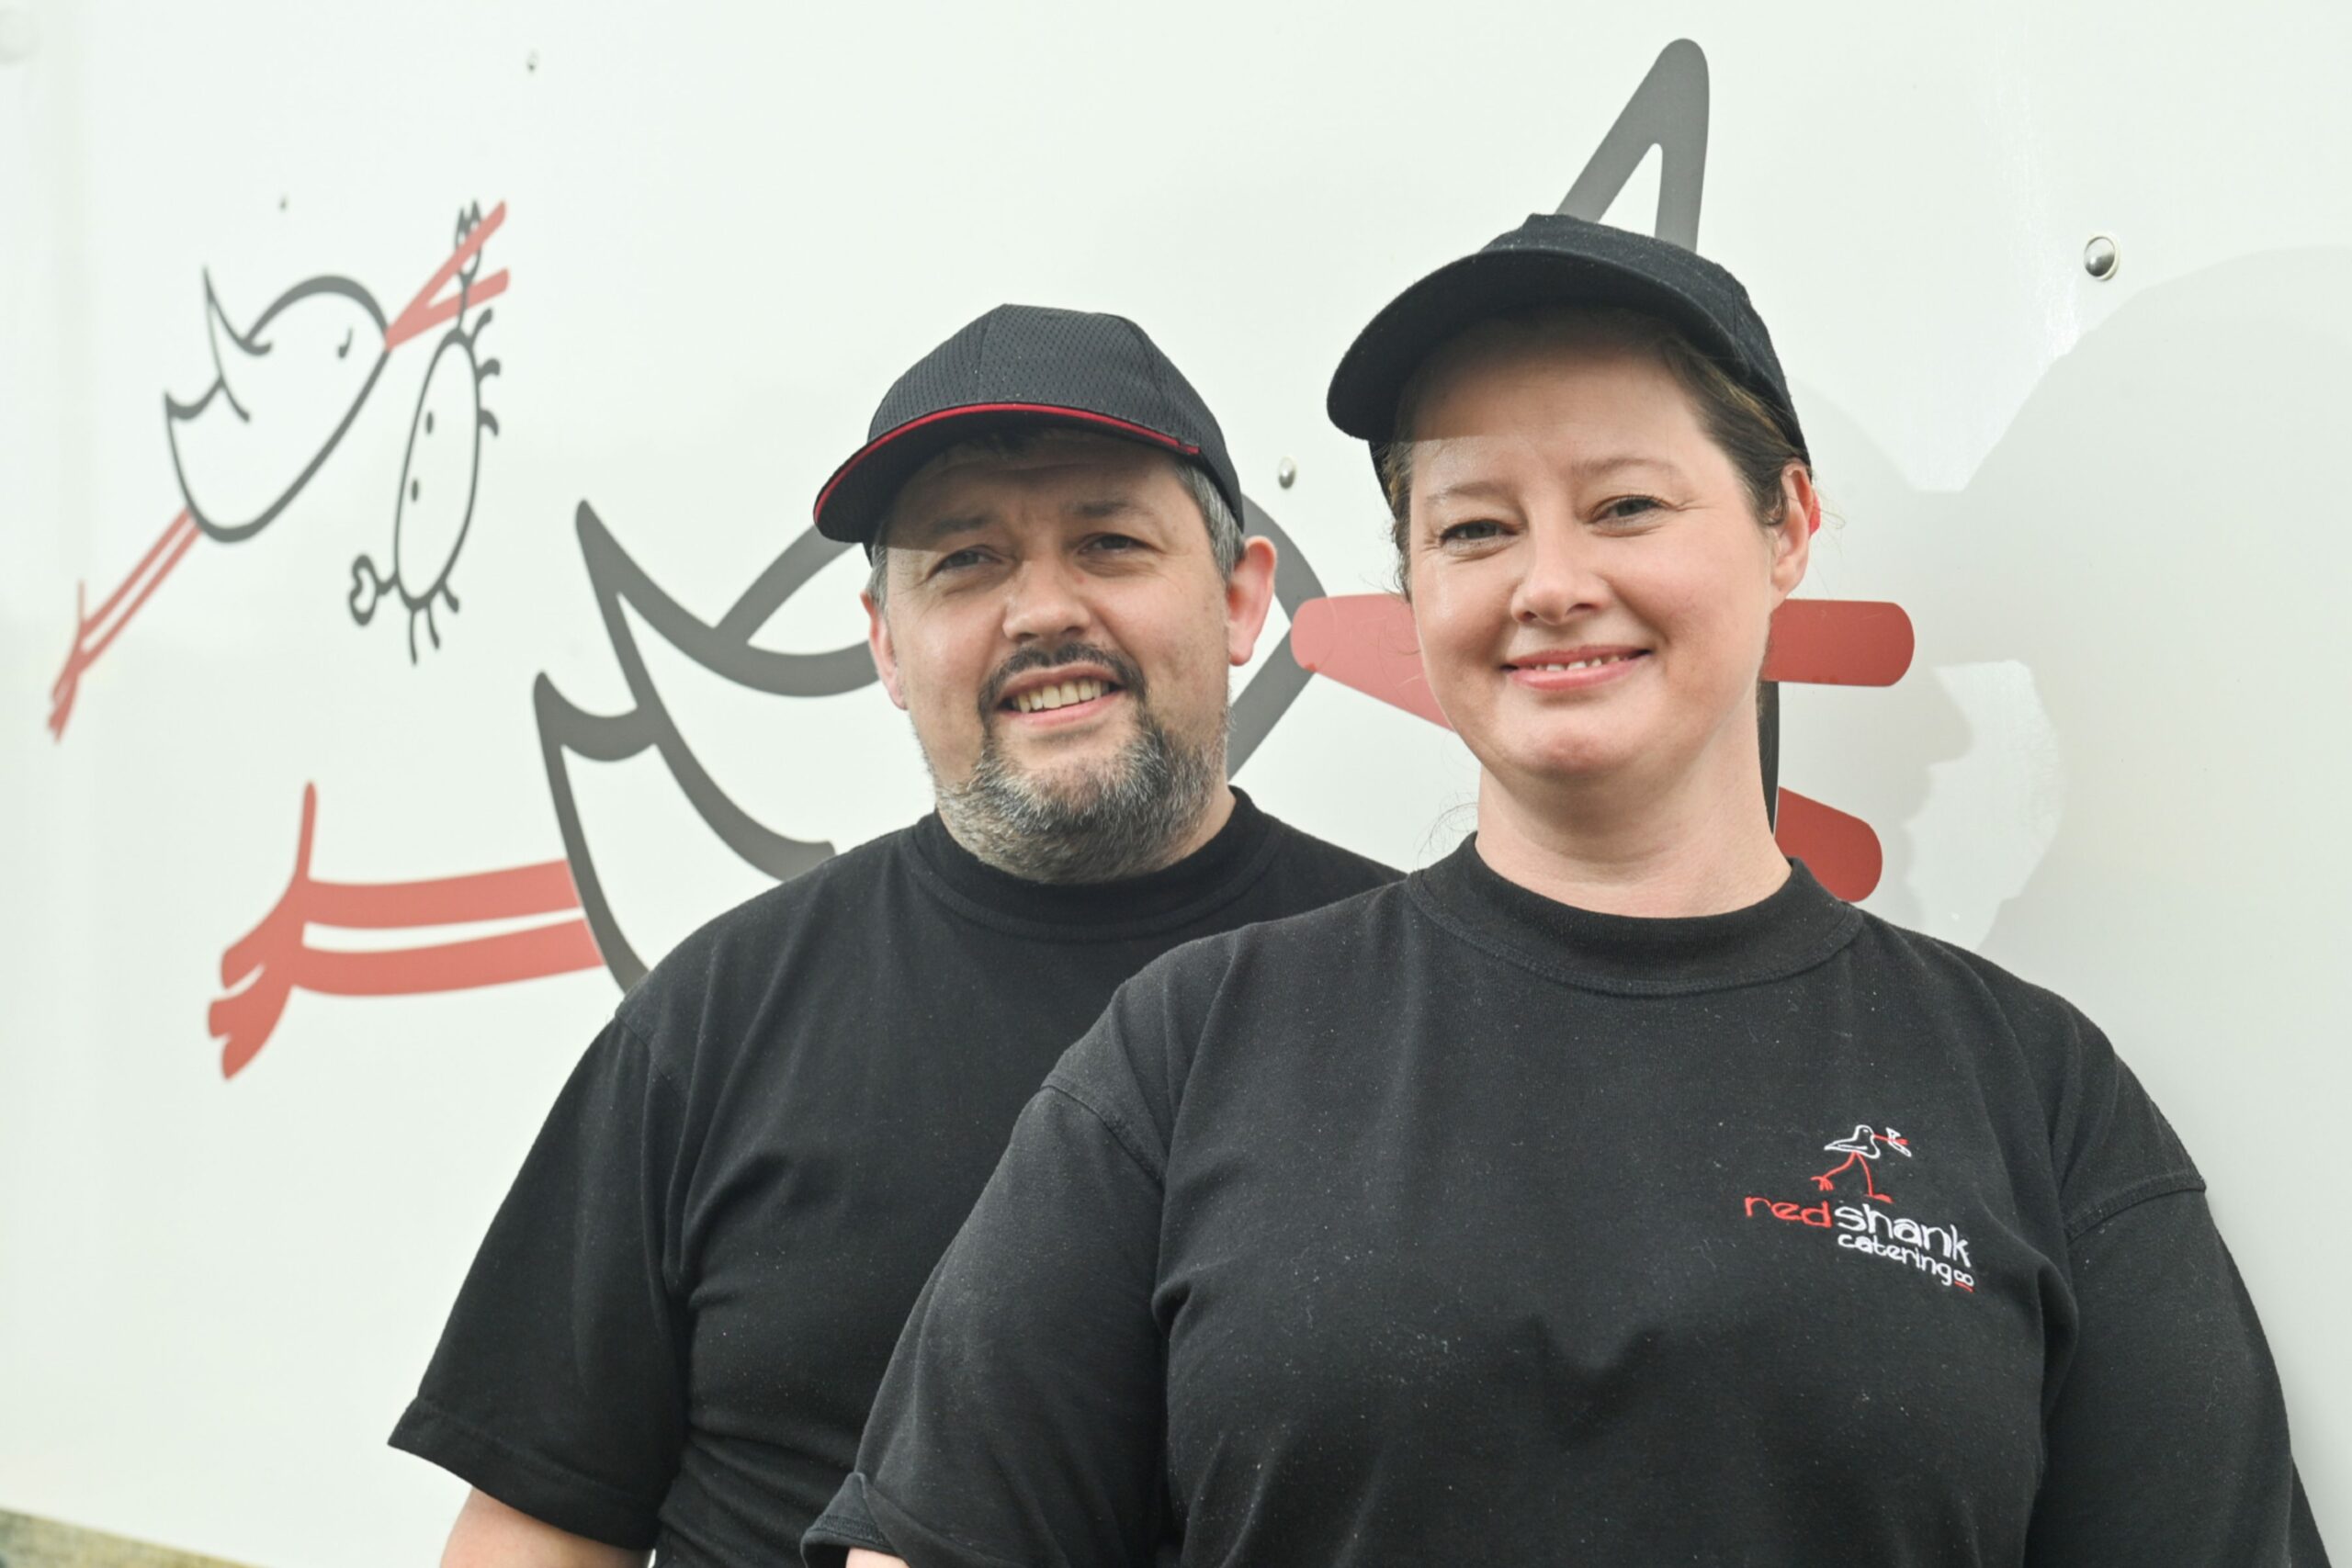 Ann Marie and Jamie Ross, owners of Redshank.